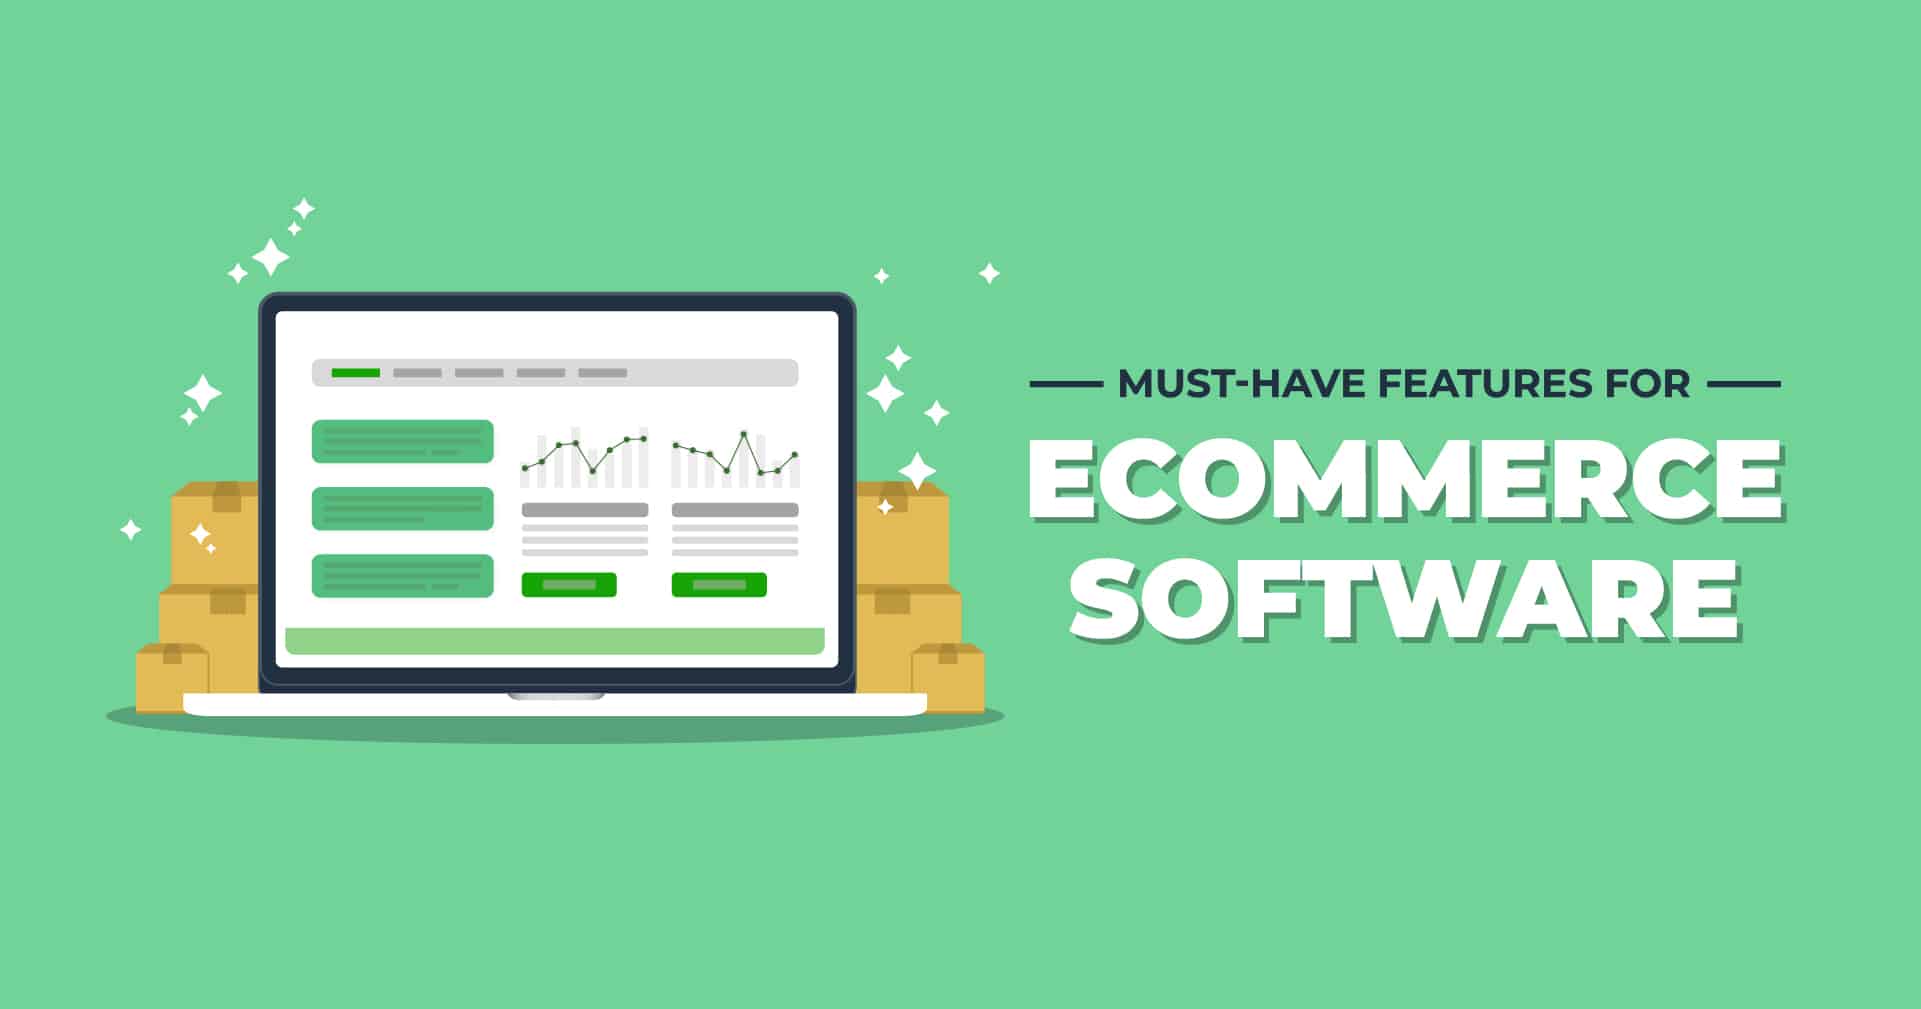 Must-Have Features for Ecommerce Software